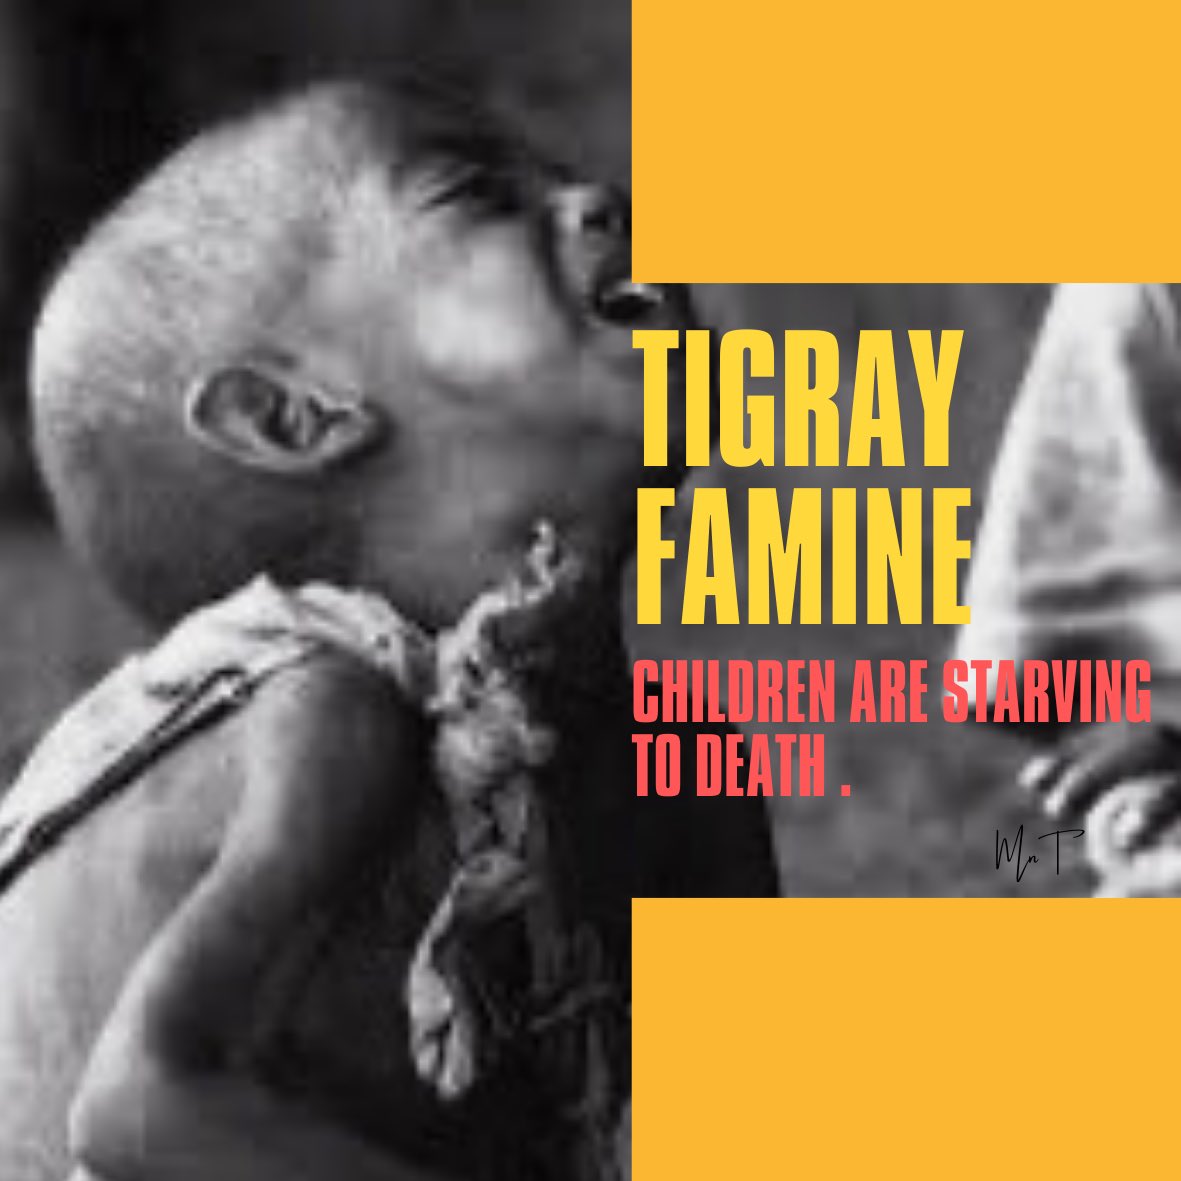 Famine in #Tigray is not just a statistic—it’s a reality for countless children facing starvation. Humanitarian organizations must mobilize quickly to alleviate the #TigrayFamine catastrophe. #Aid4Tigray #AUSummit @UNICEF @UN @SavetheChildren @WFP_Ethiopia @SamanthaJPower